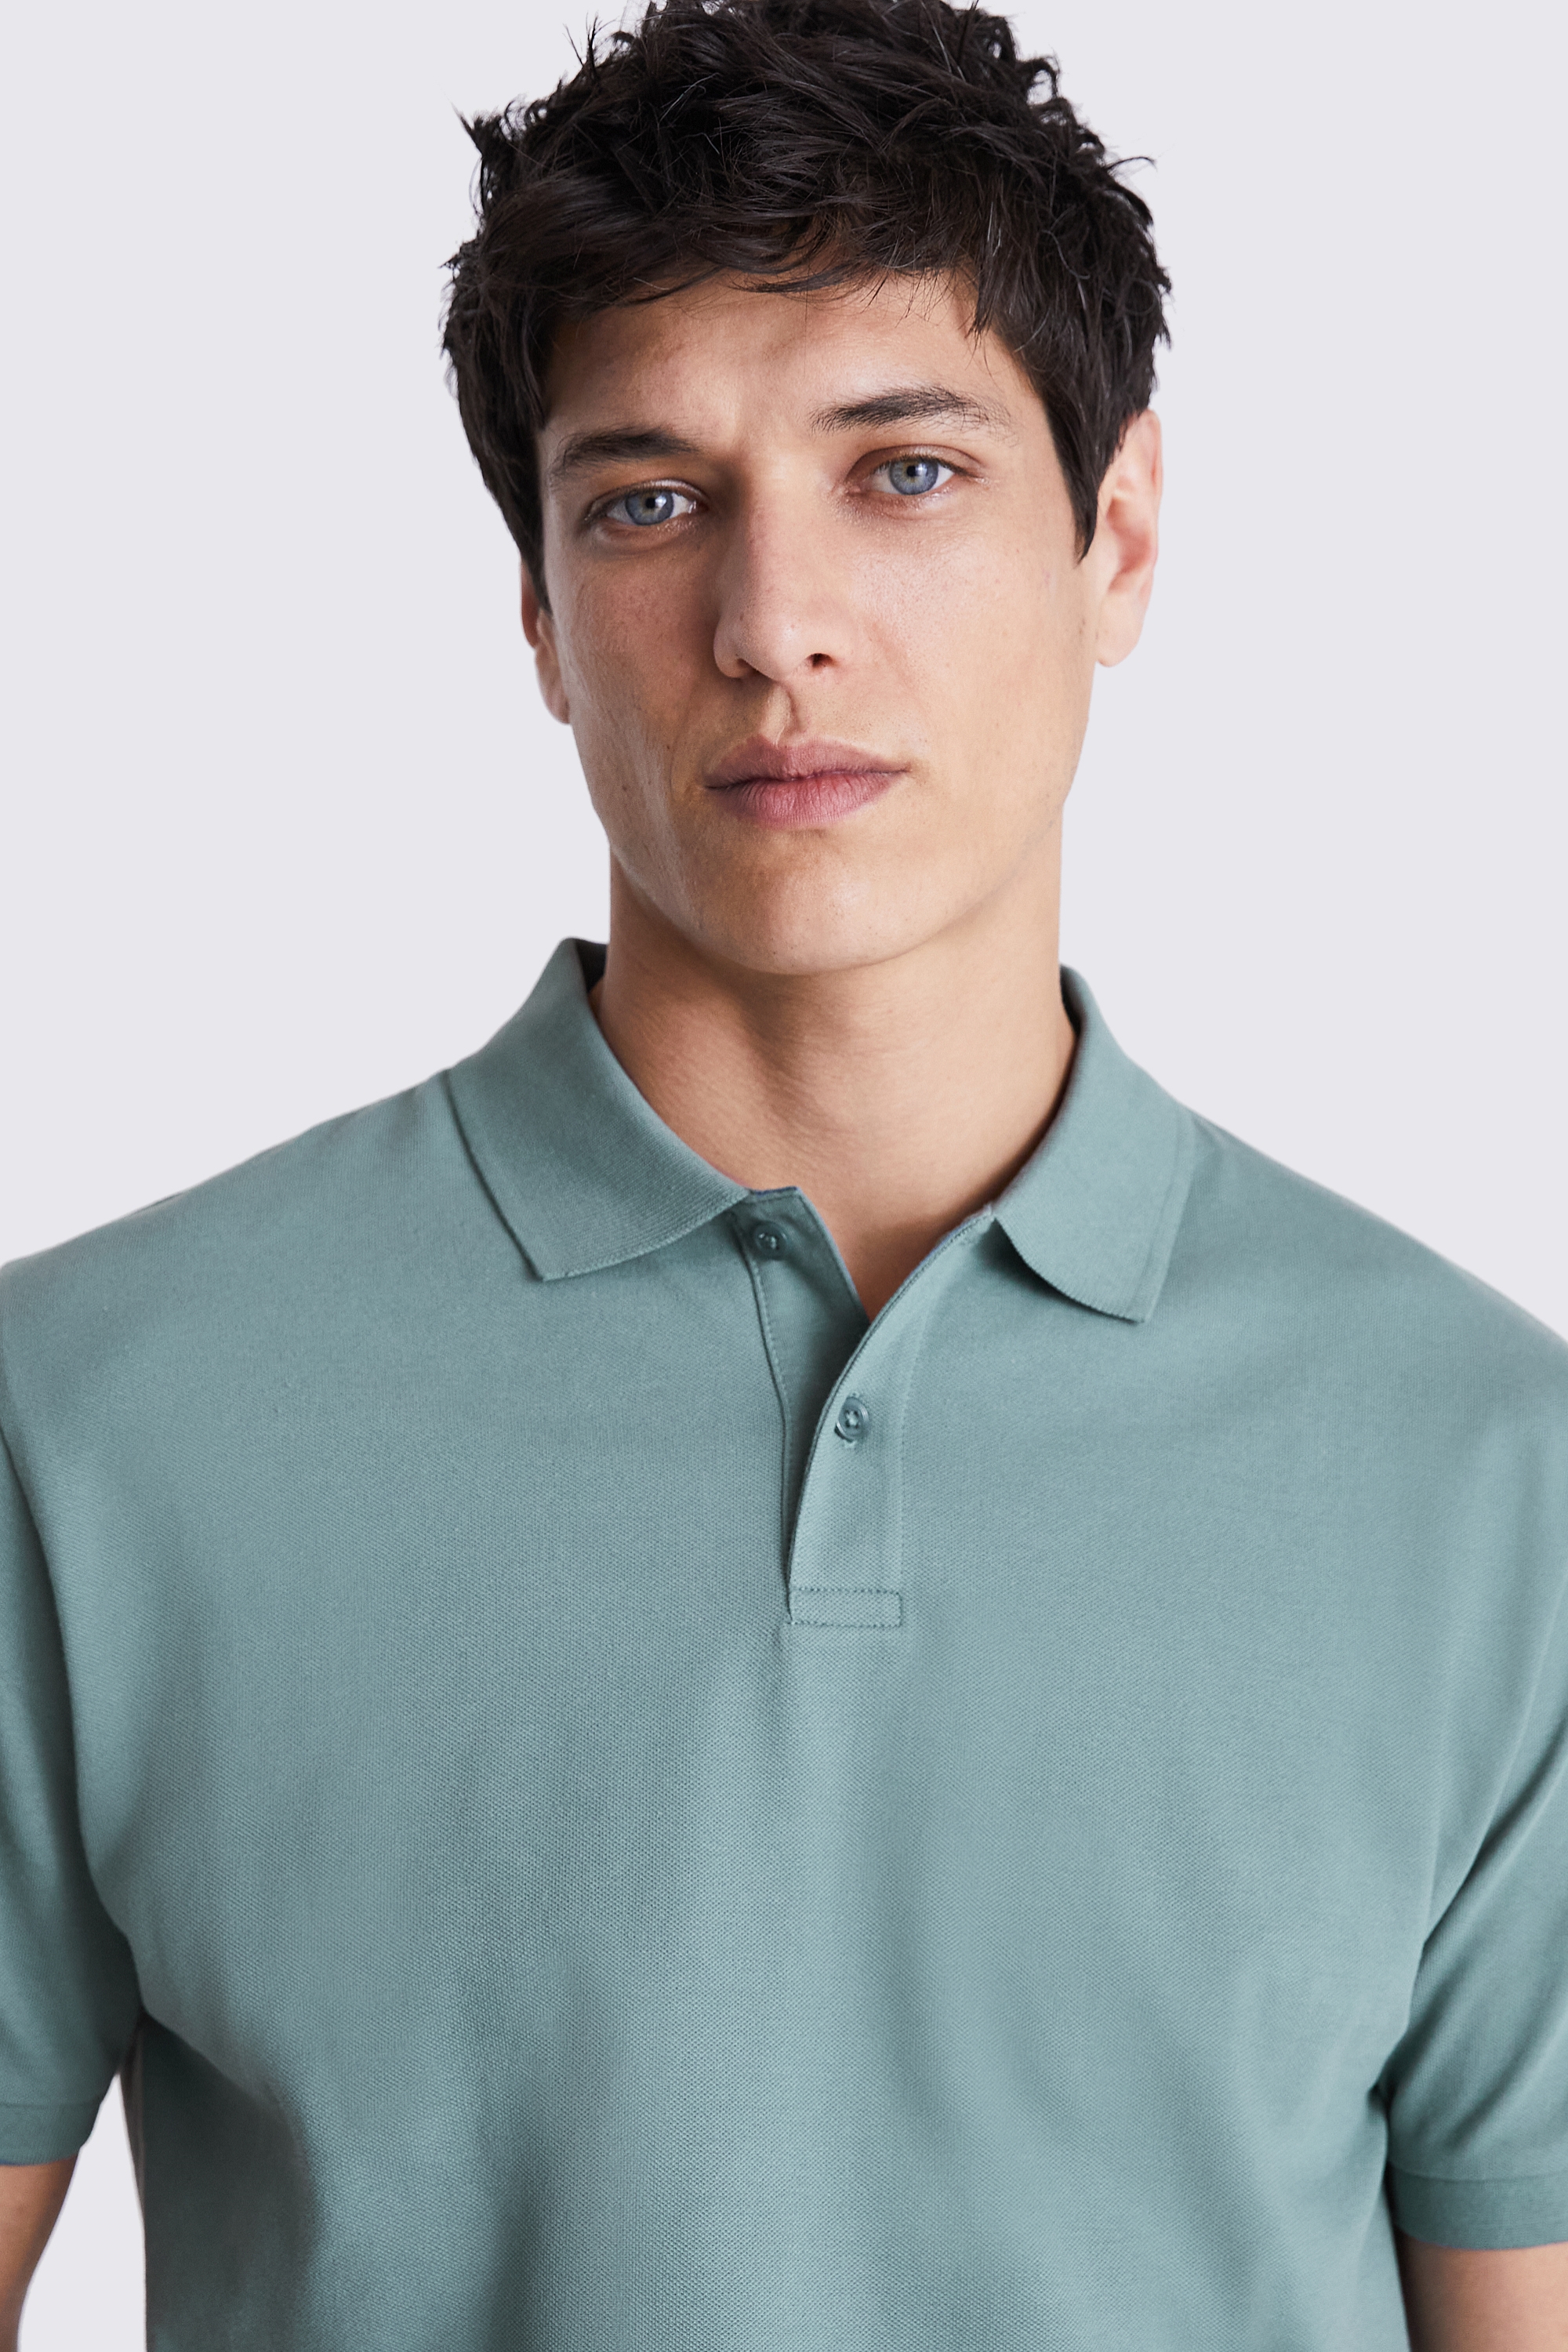 Teal Piqué Polo Shirt | Buy Online at Moss